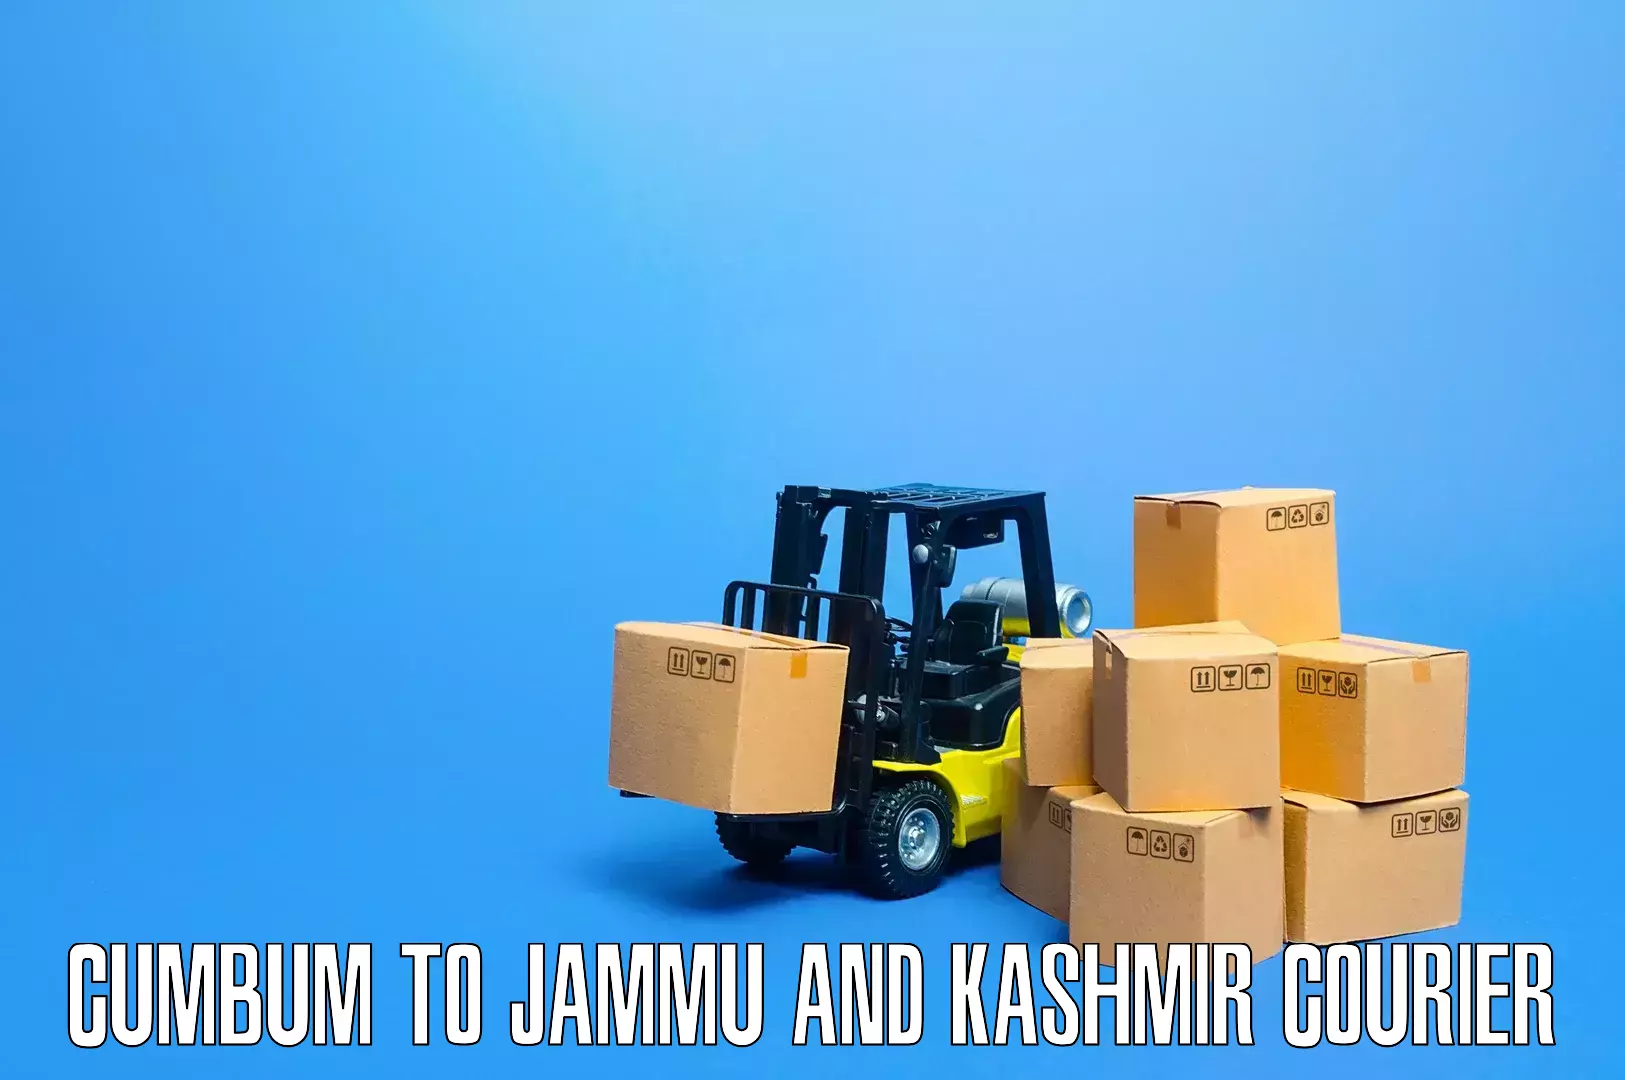 Professional movers and packers in Cumbum to University of Kashmir Srinagar